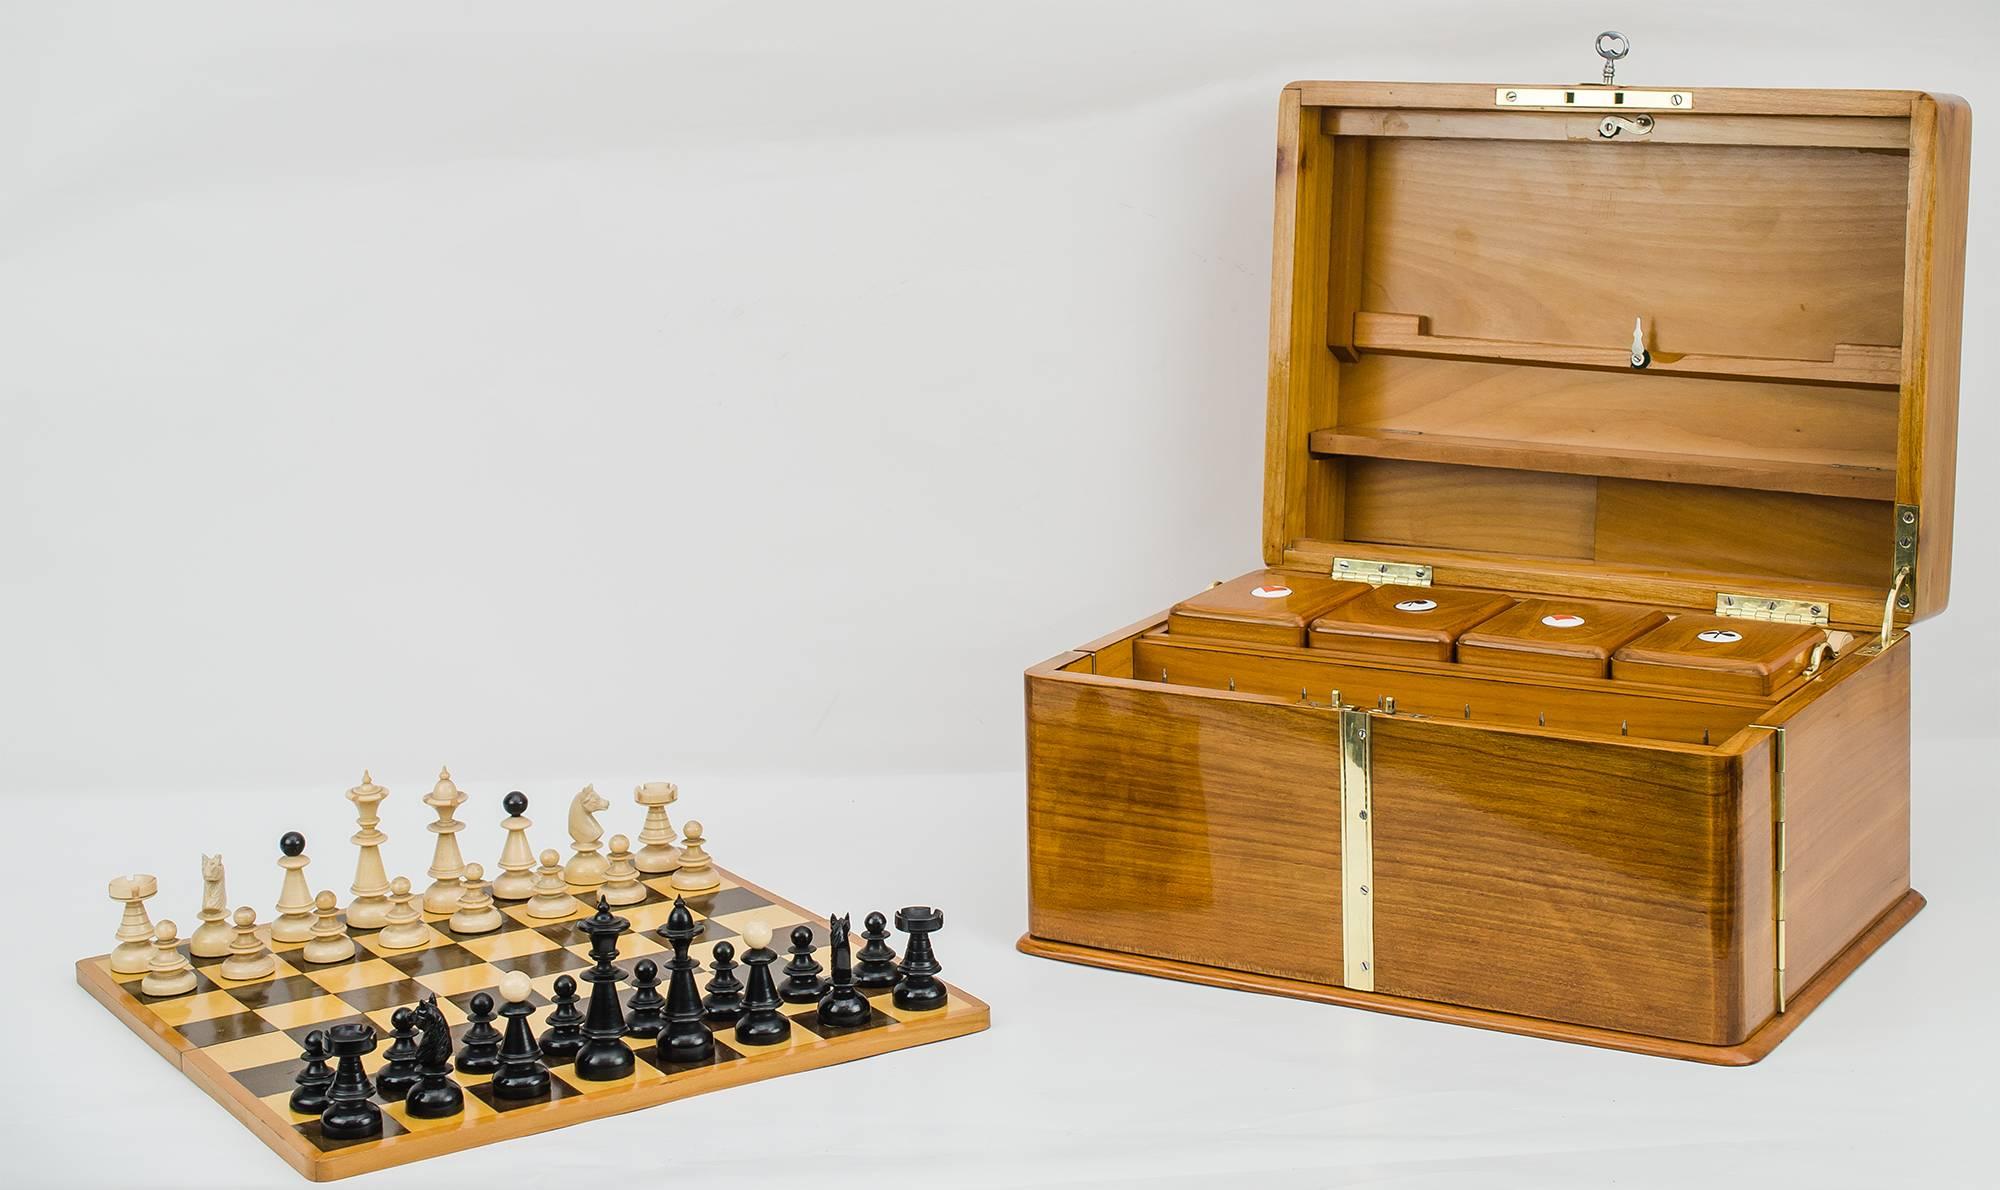 Great Art Nouveau toy box, circa 1905
The outside of the box are polished, everything else is original condition
Rare version in cherrywood
Chess and Mill (Nine Men's Morris) game on a board (including figures)
Four bowls and a dice shaker
Card